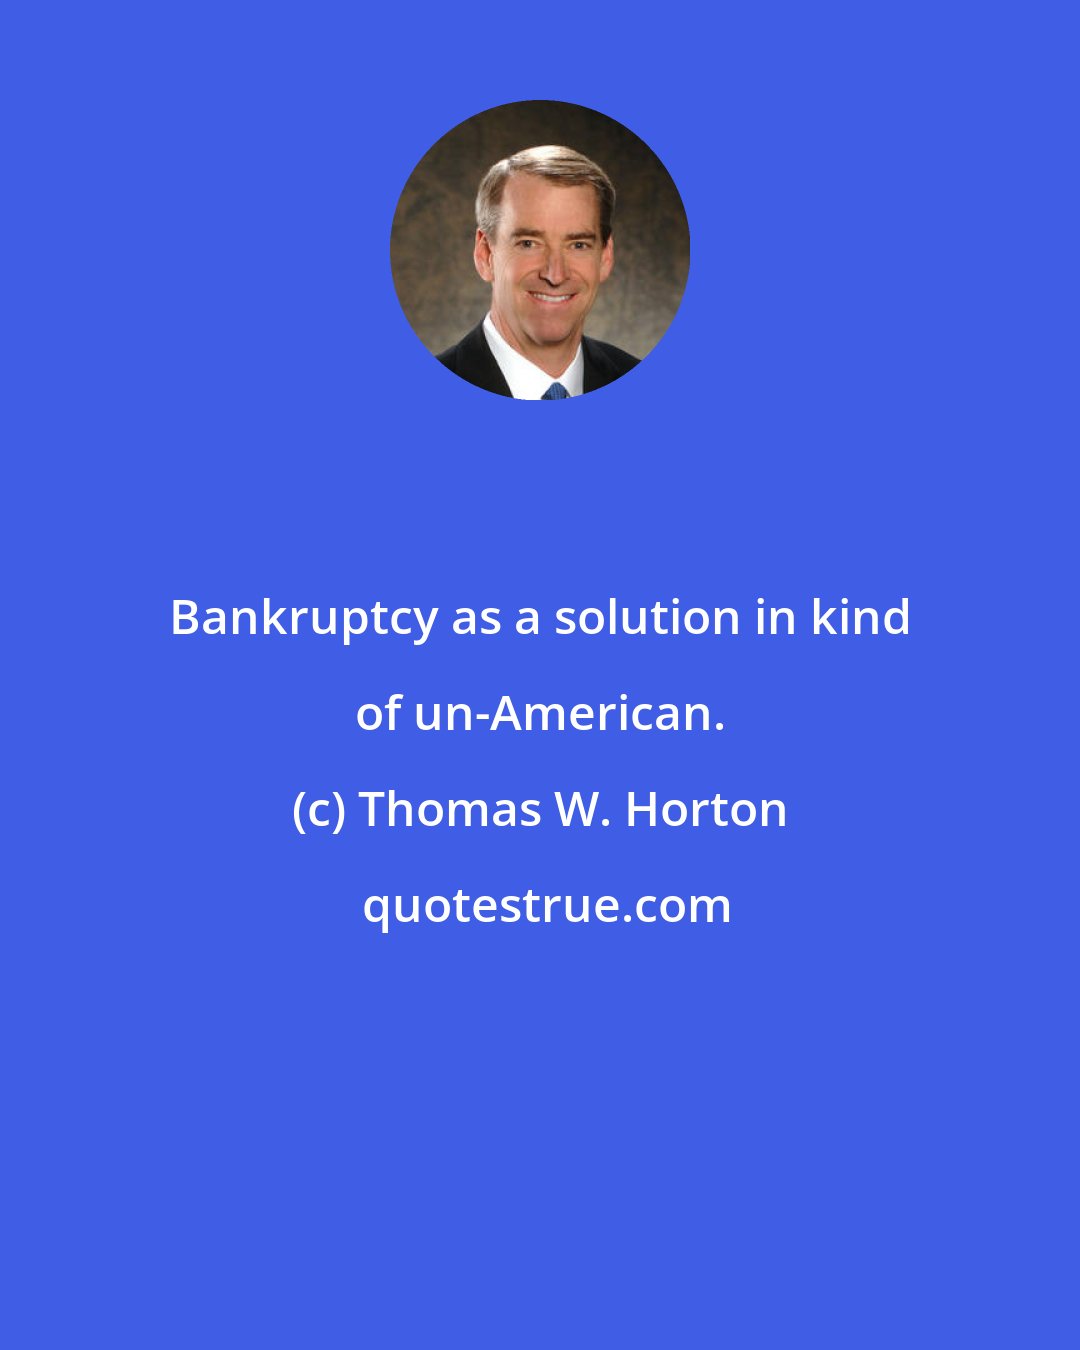 Thomas W. Horton: Bankruptcy as a solution in kind of un-American.